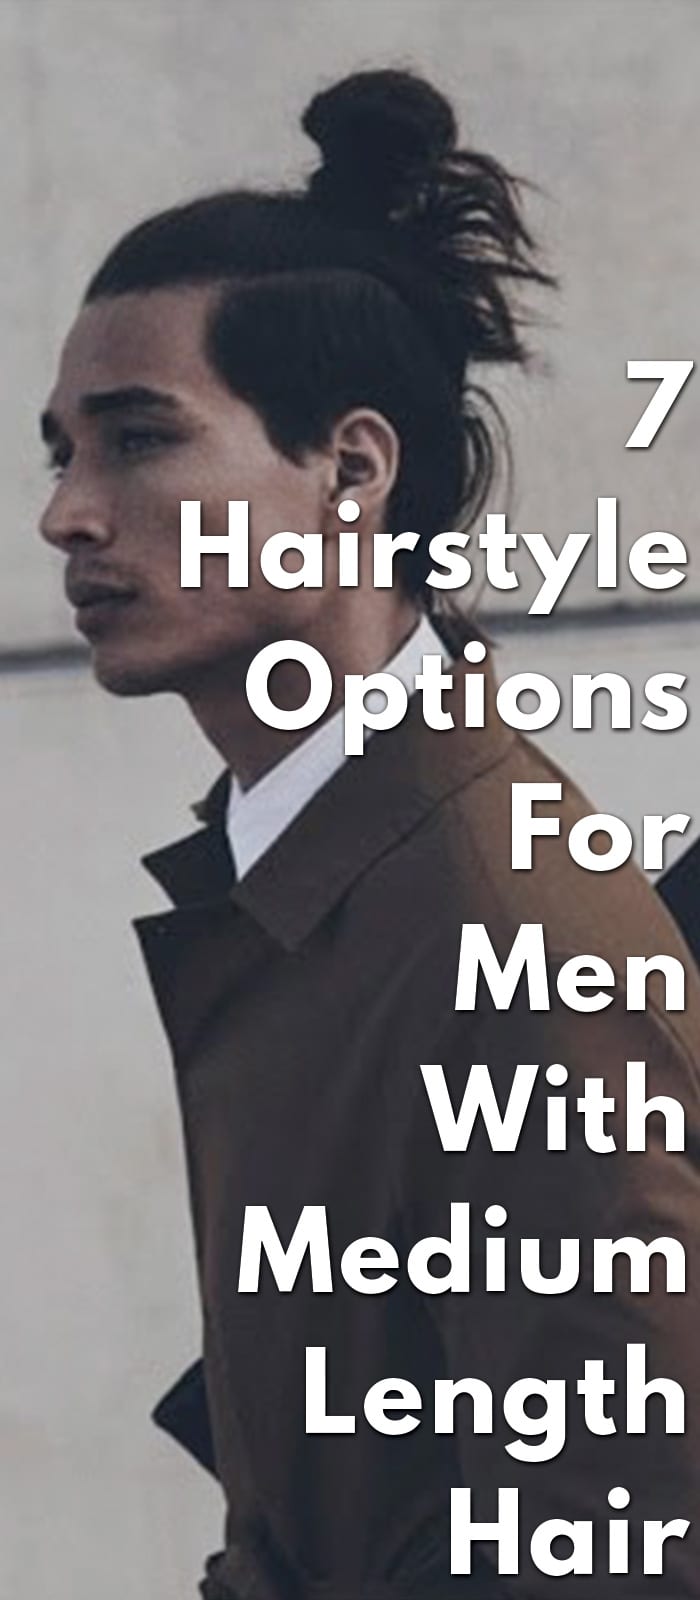 7-Hairstyle-Options-For-Men-With-Medium-Length-Hair